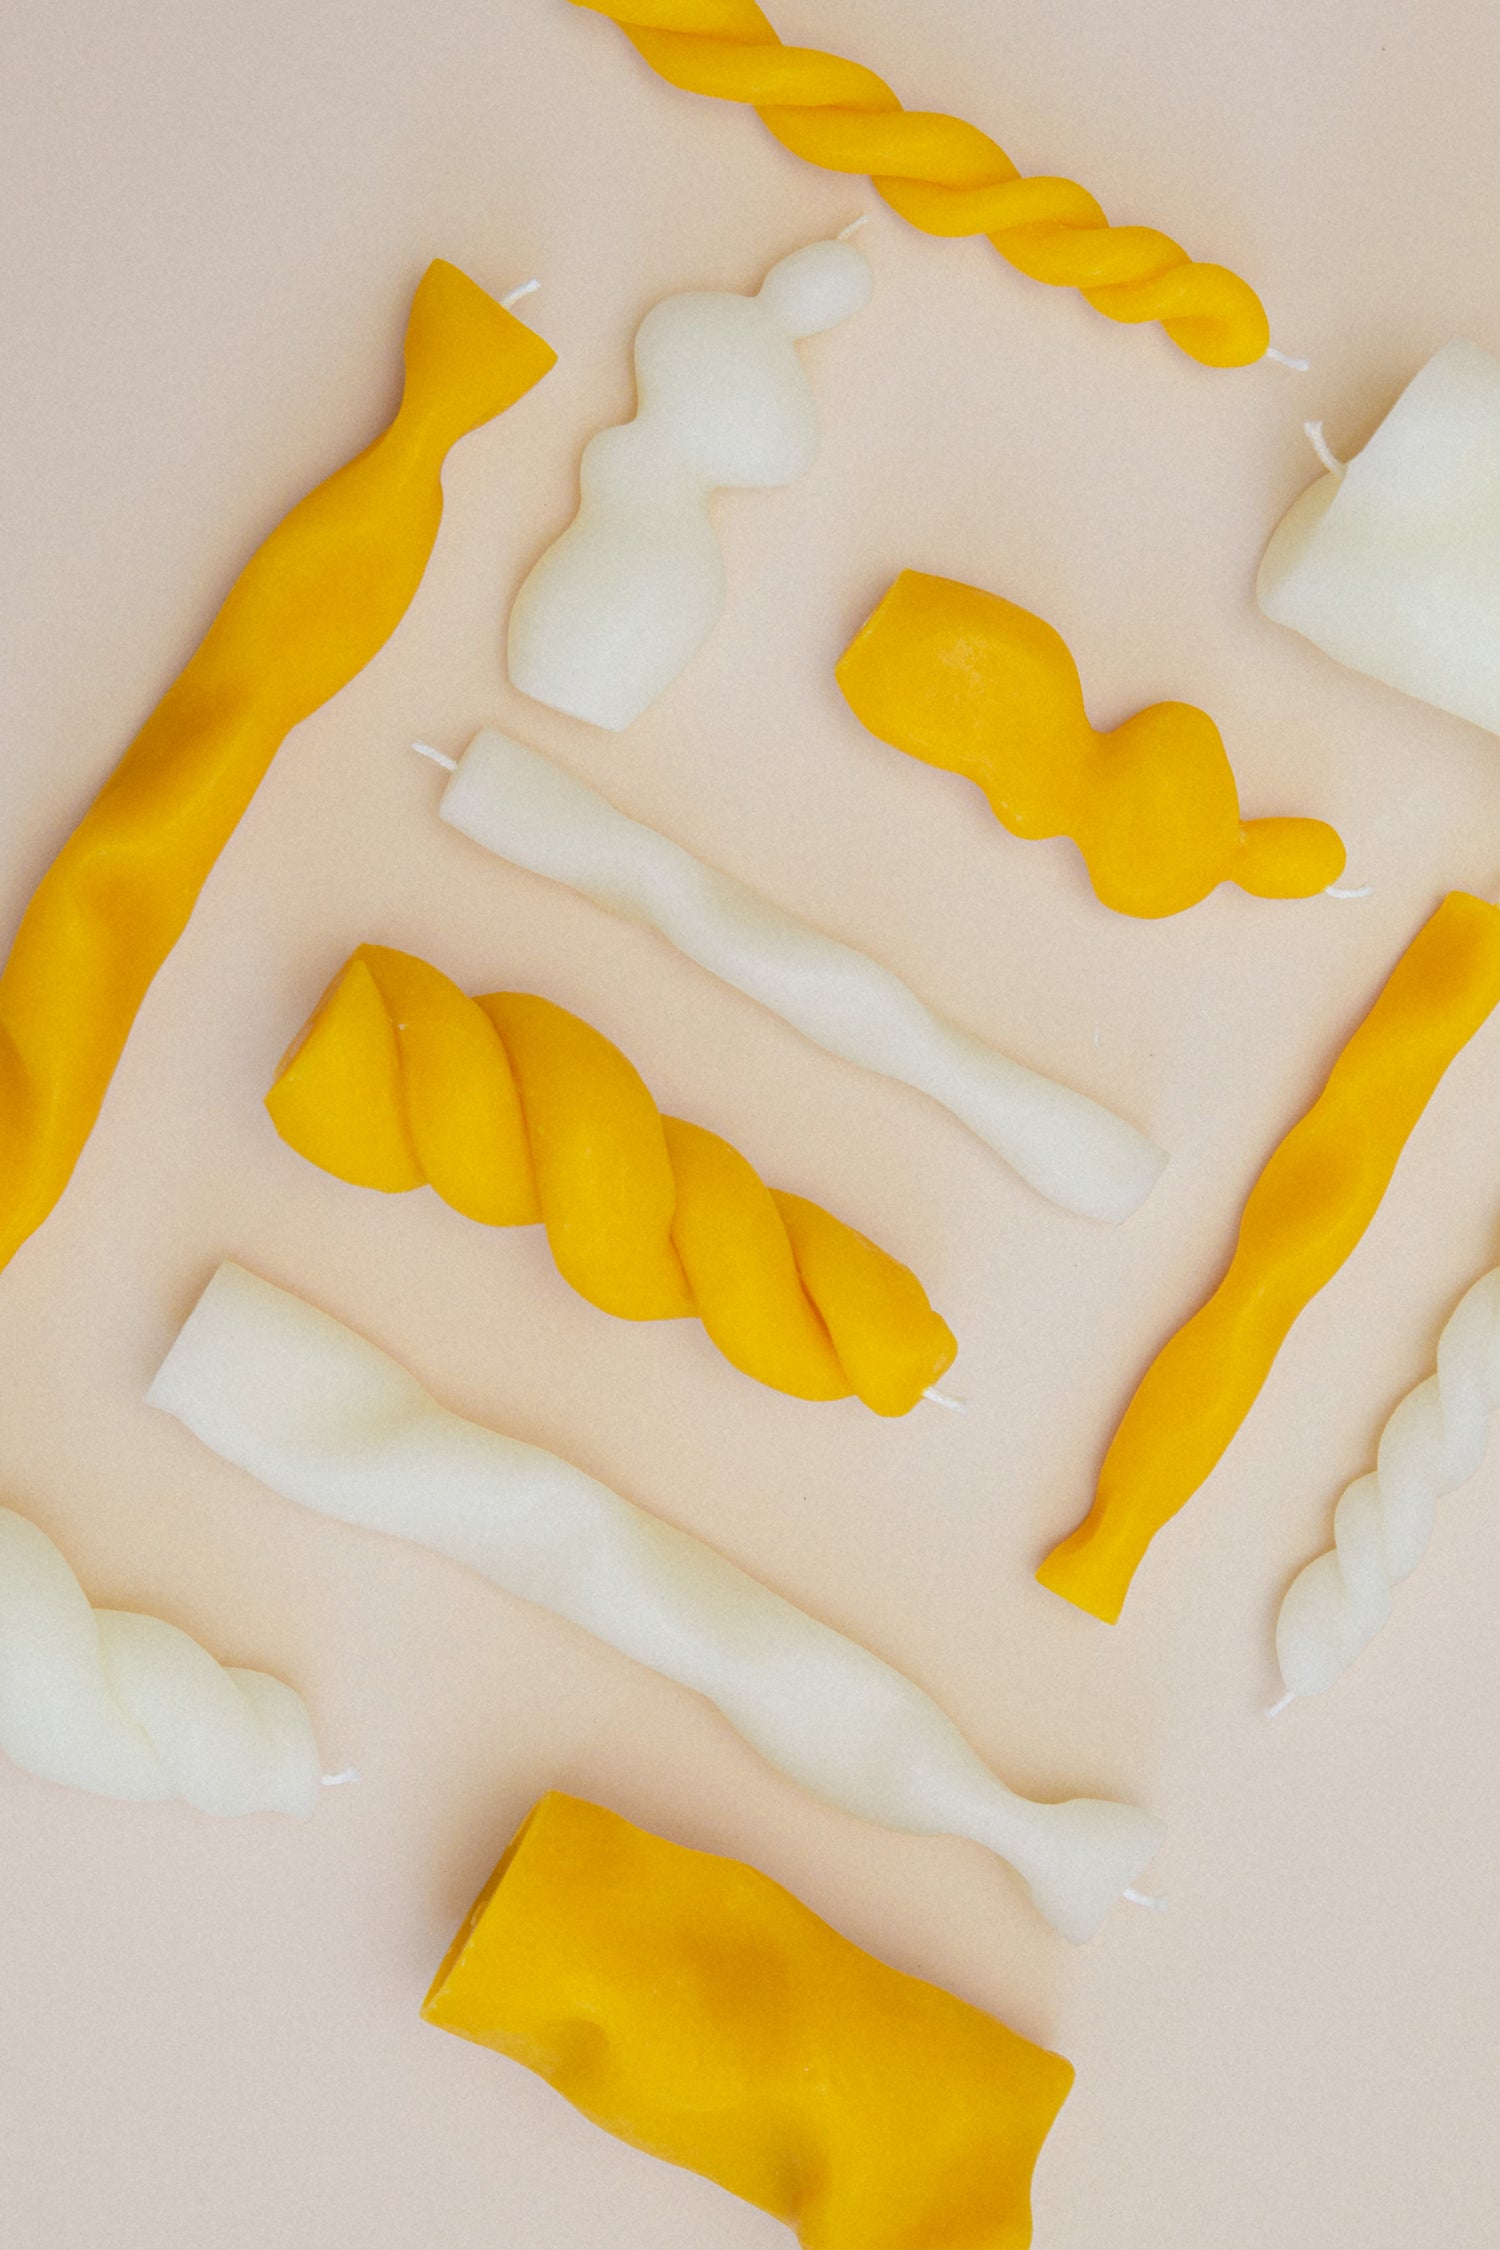 Flatlay of Different Handmade Sculptural Candles Made from White and Yellow Beeswax